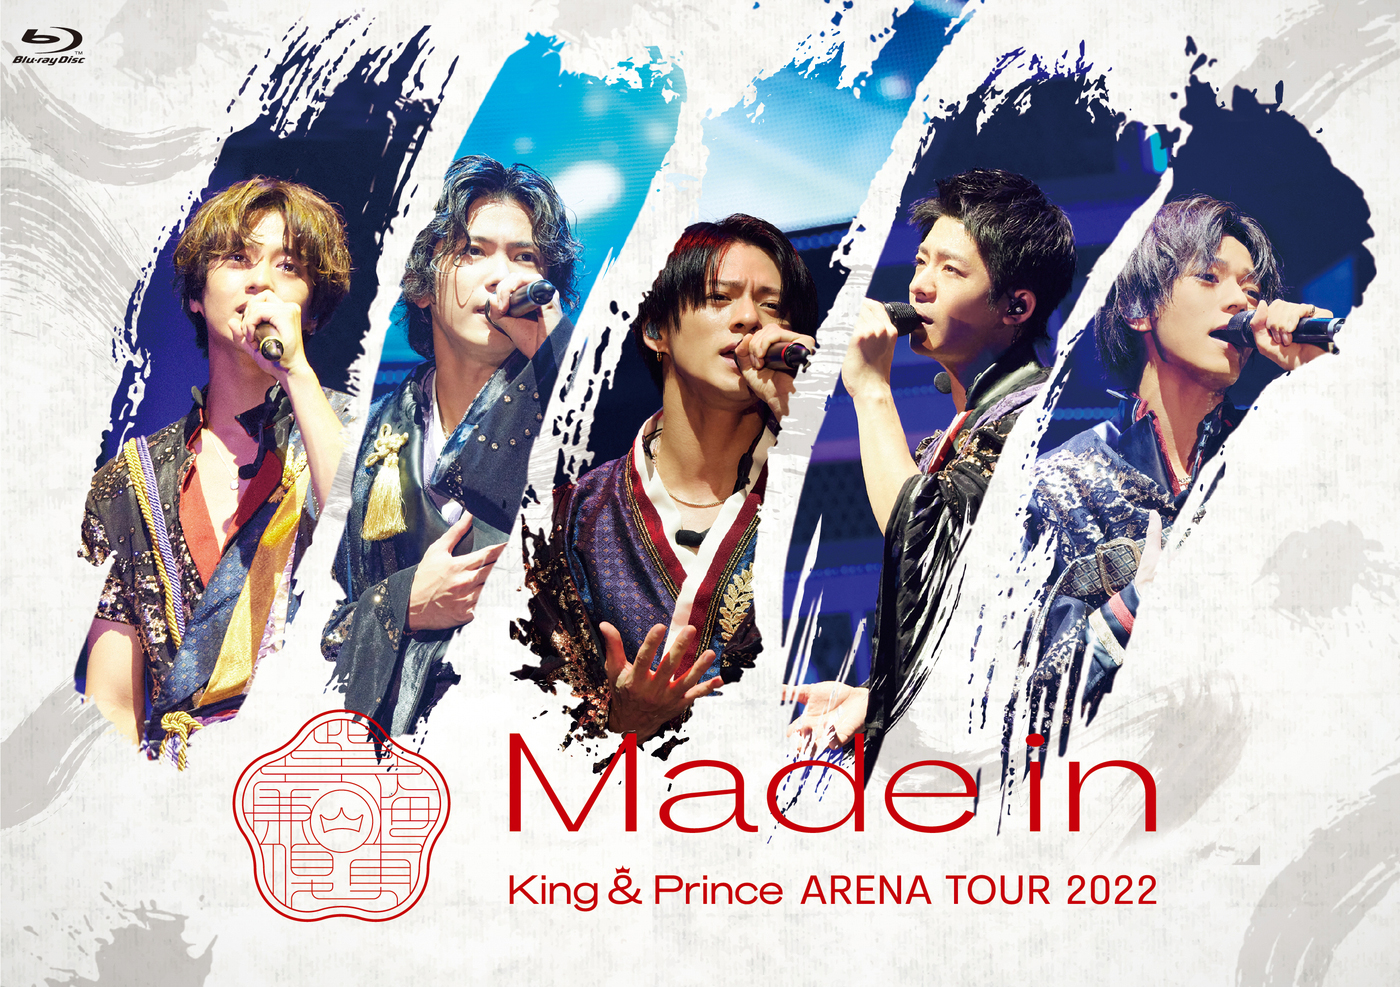 King ＆ Prince、ライブBD＆DVD『King ＆ Prince ARENA TOUR 2022 ～Made in～』の詳細公開 - 画像一覧（1/4）